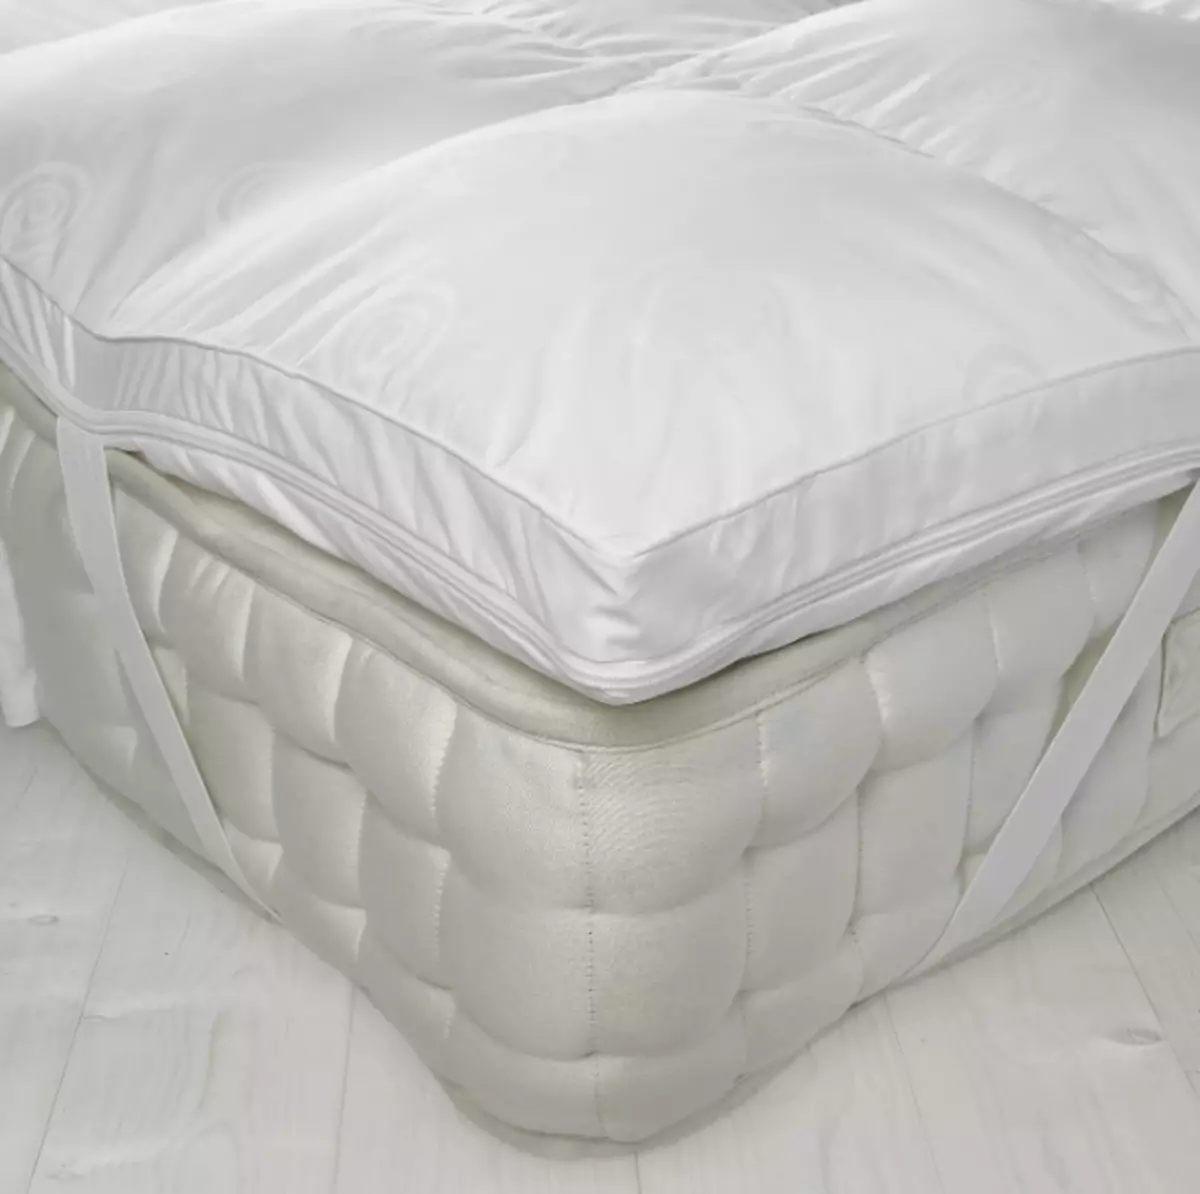 How to make mattress tougher? Selecting a stiffness overlay on a soft mattress. How to increase rigidity at home? 20788_10